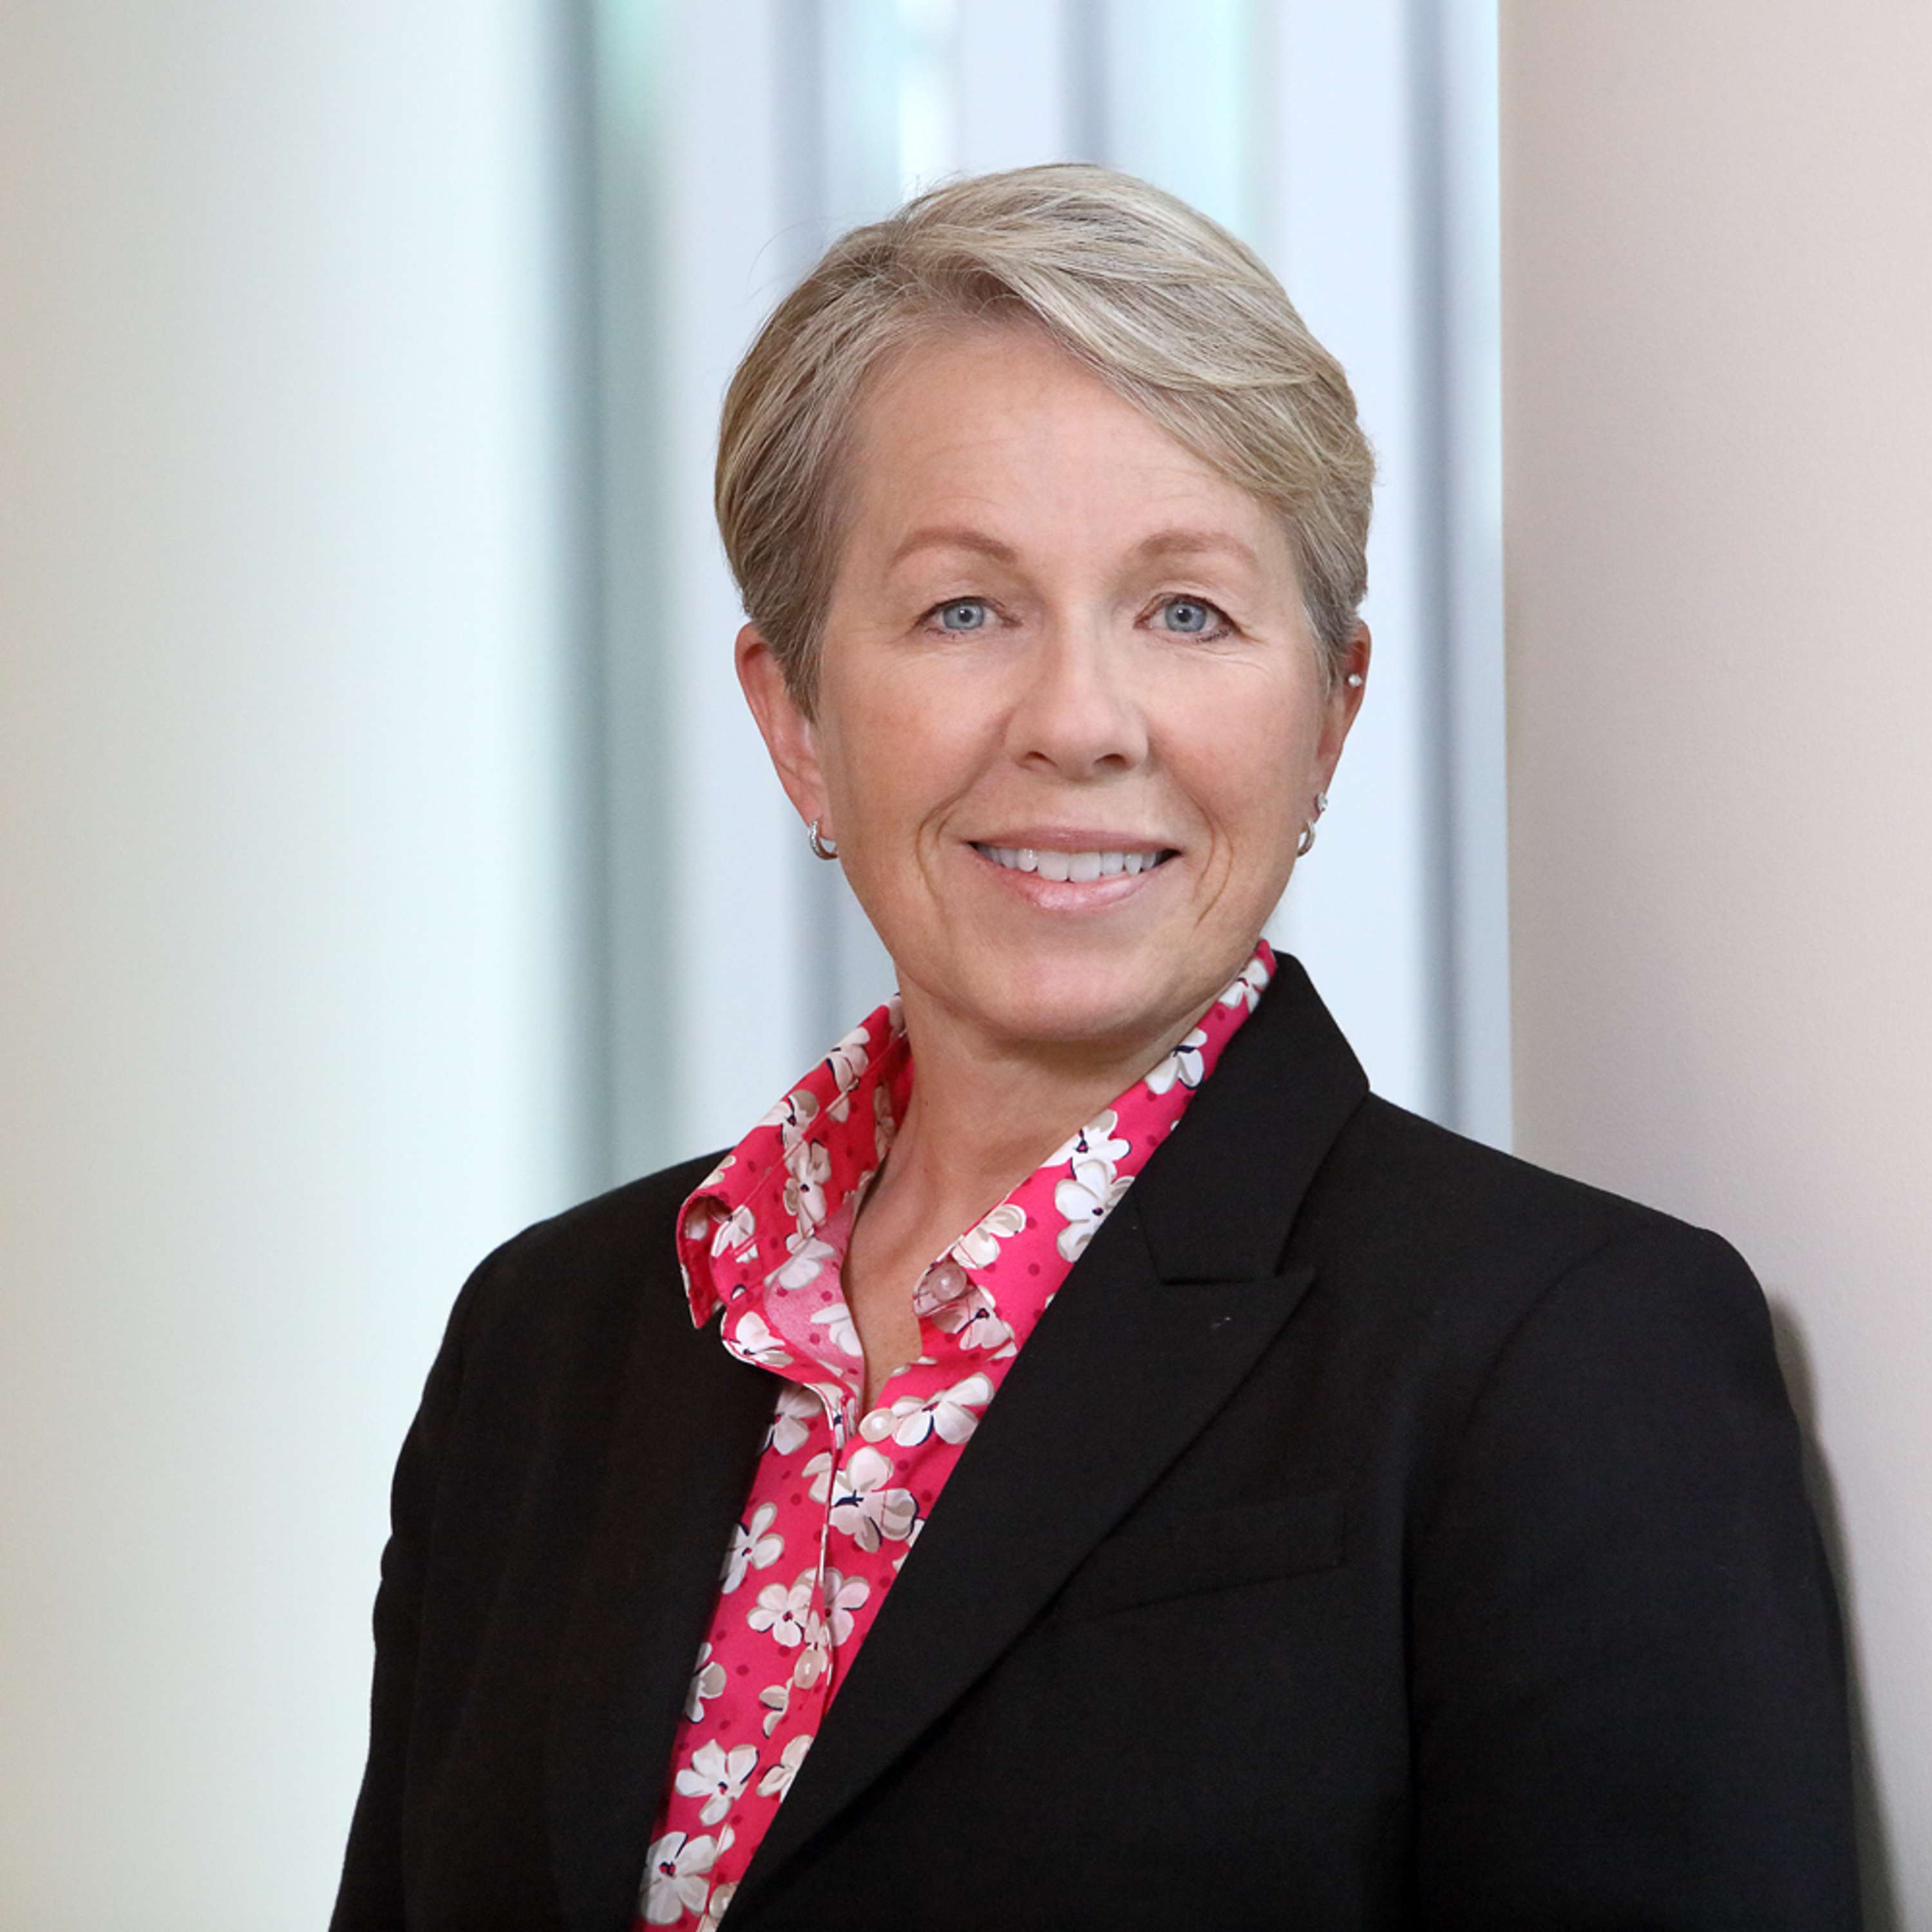 Episode 23: Interview with Jean Bennington Sweeney, Chief Sustainability Officer for 3M Company: 3M’s sustainability journey. 